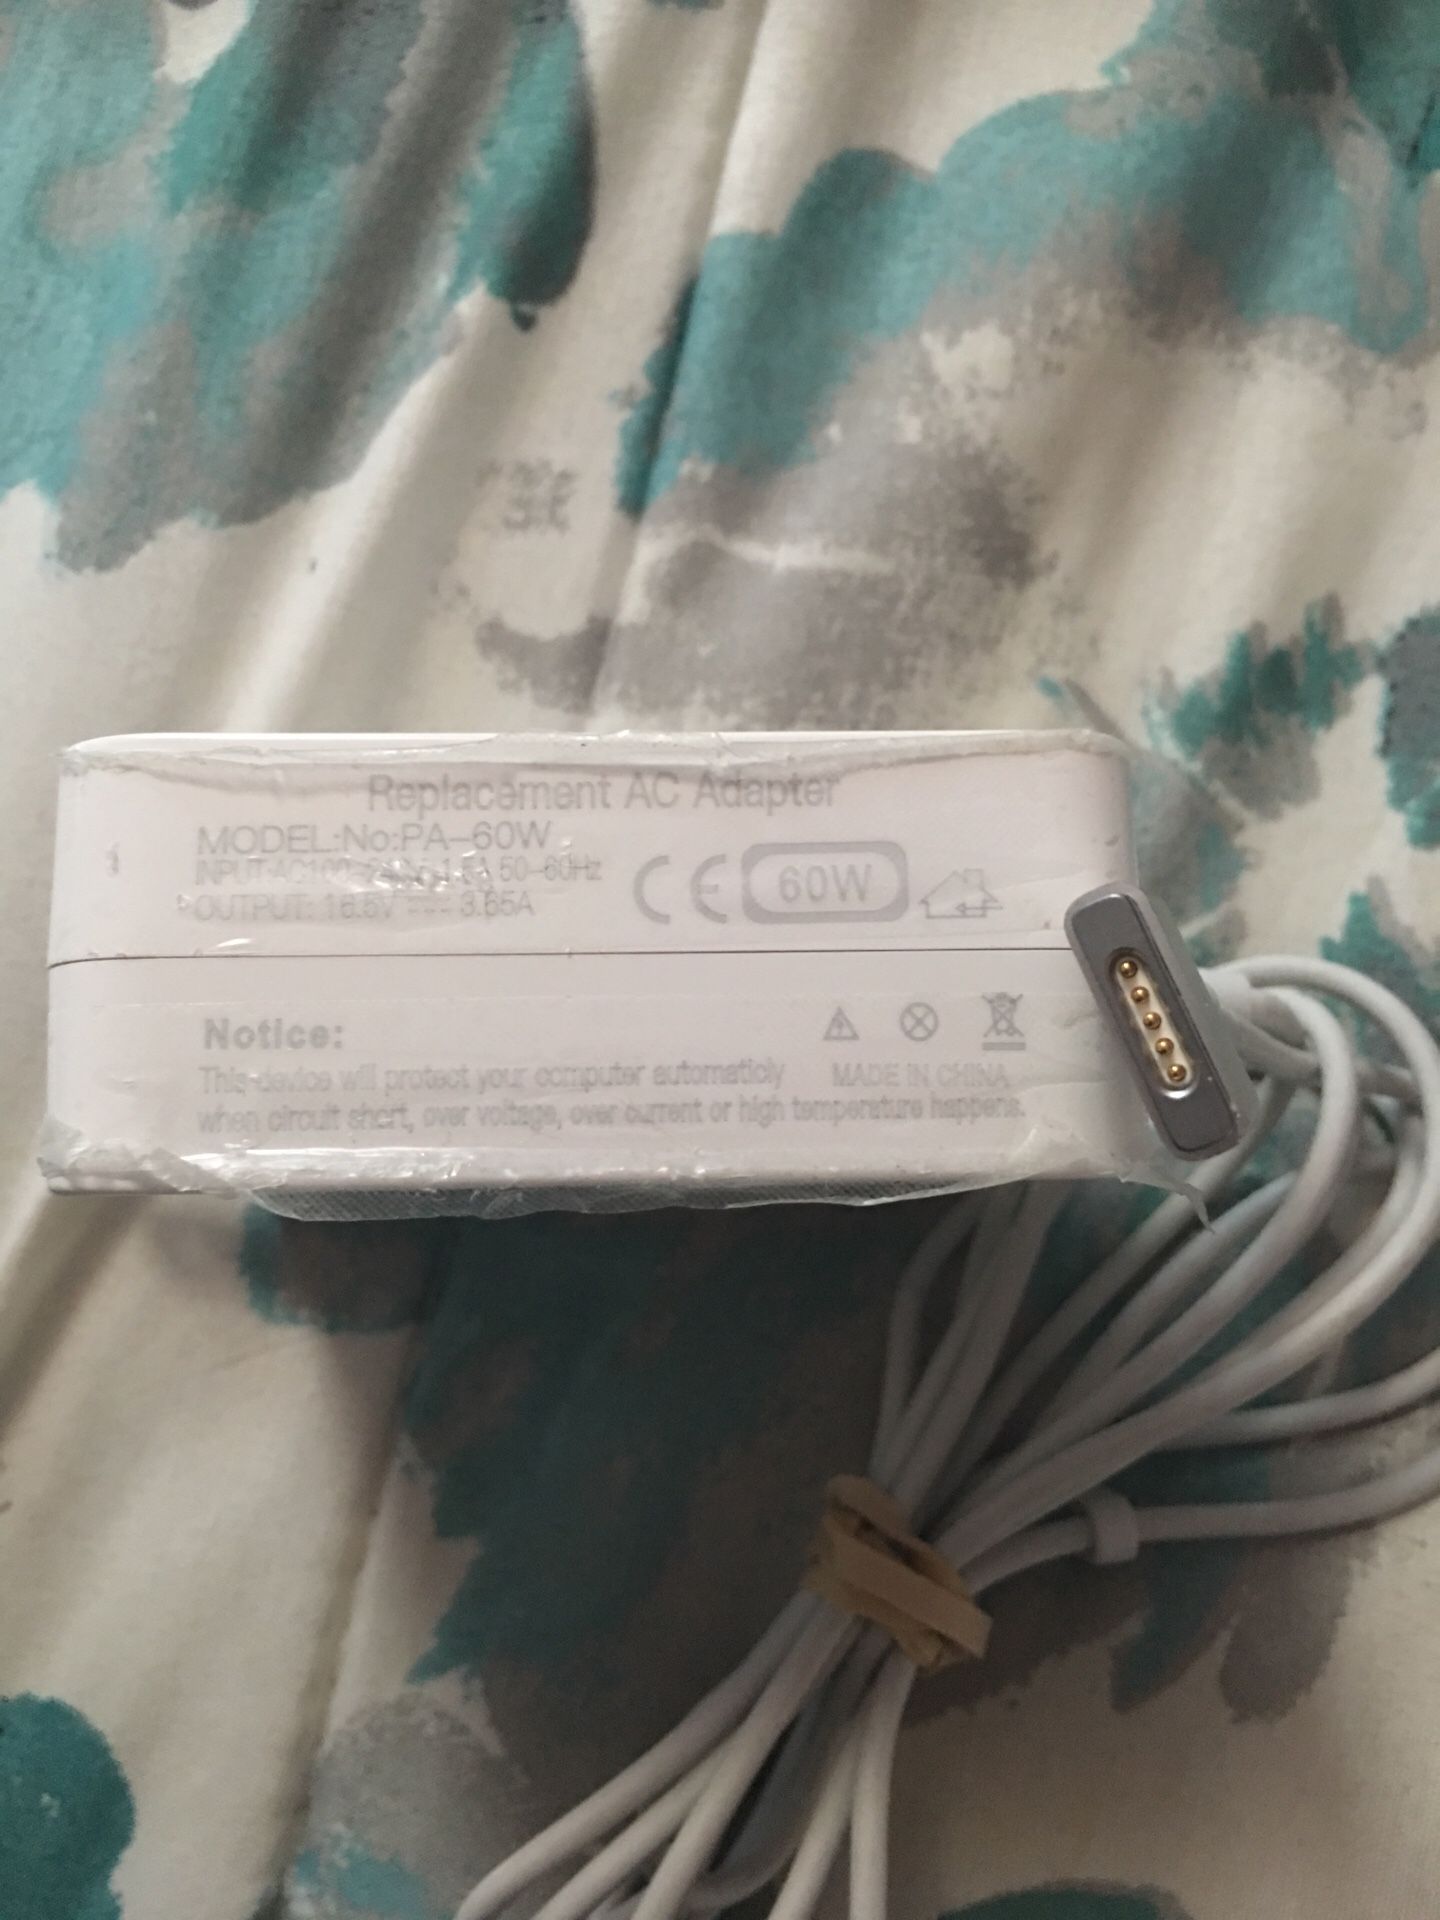 Charger for MacBook 60w